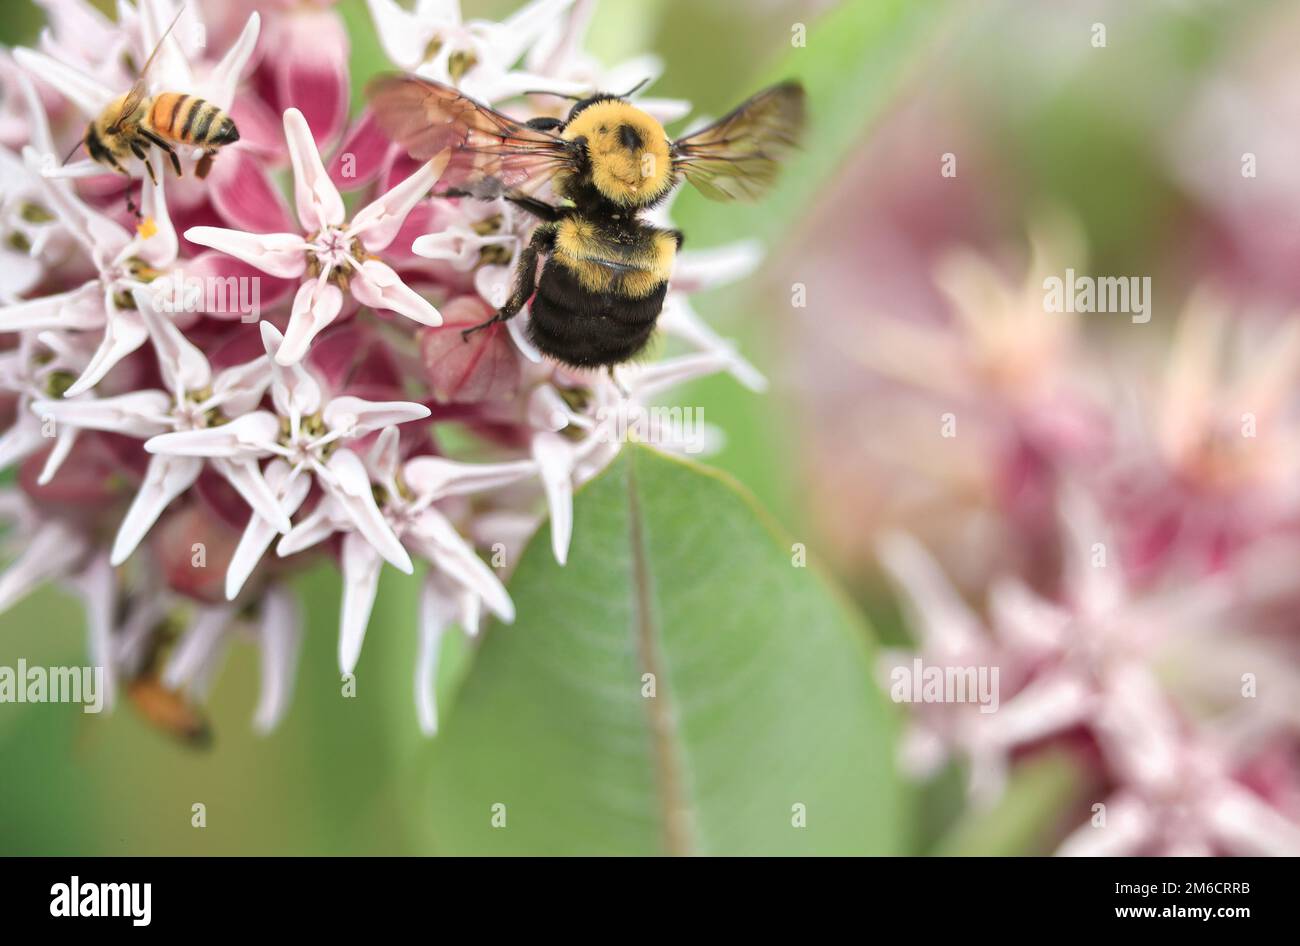 A Showy Milkweed blossom with both a Common Eastern Bumblebee and a Honey Bee shows their size difference. Stock Photo